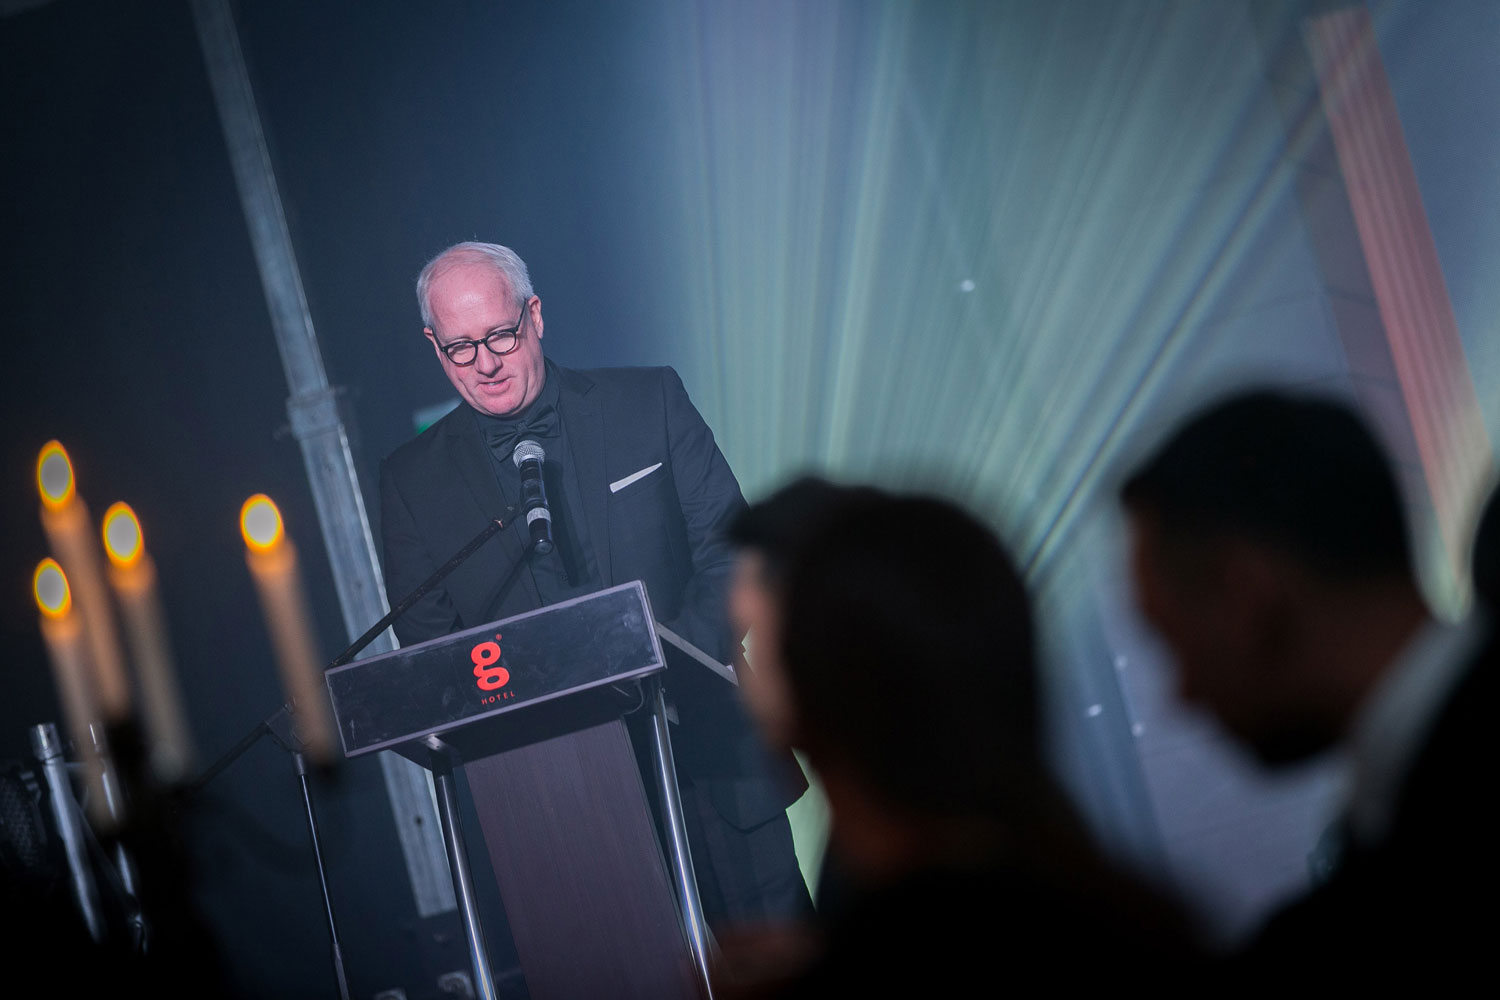 Mr Michael Hanratty, General Manager of G Hotel delivering his welcoming address and appreciation during the Ghost Ball 2018.